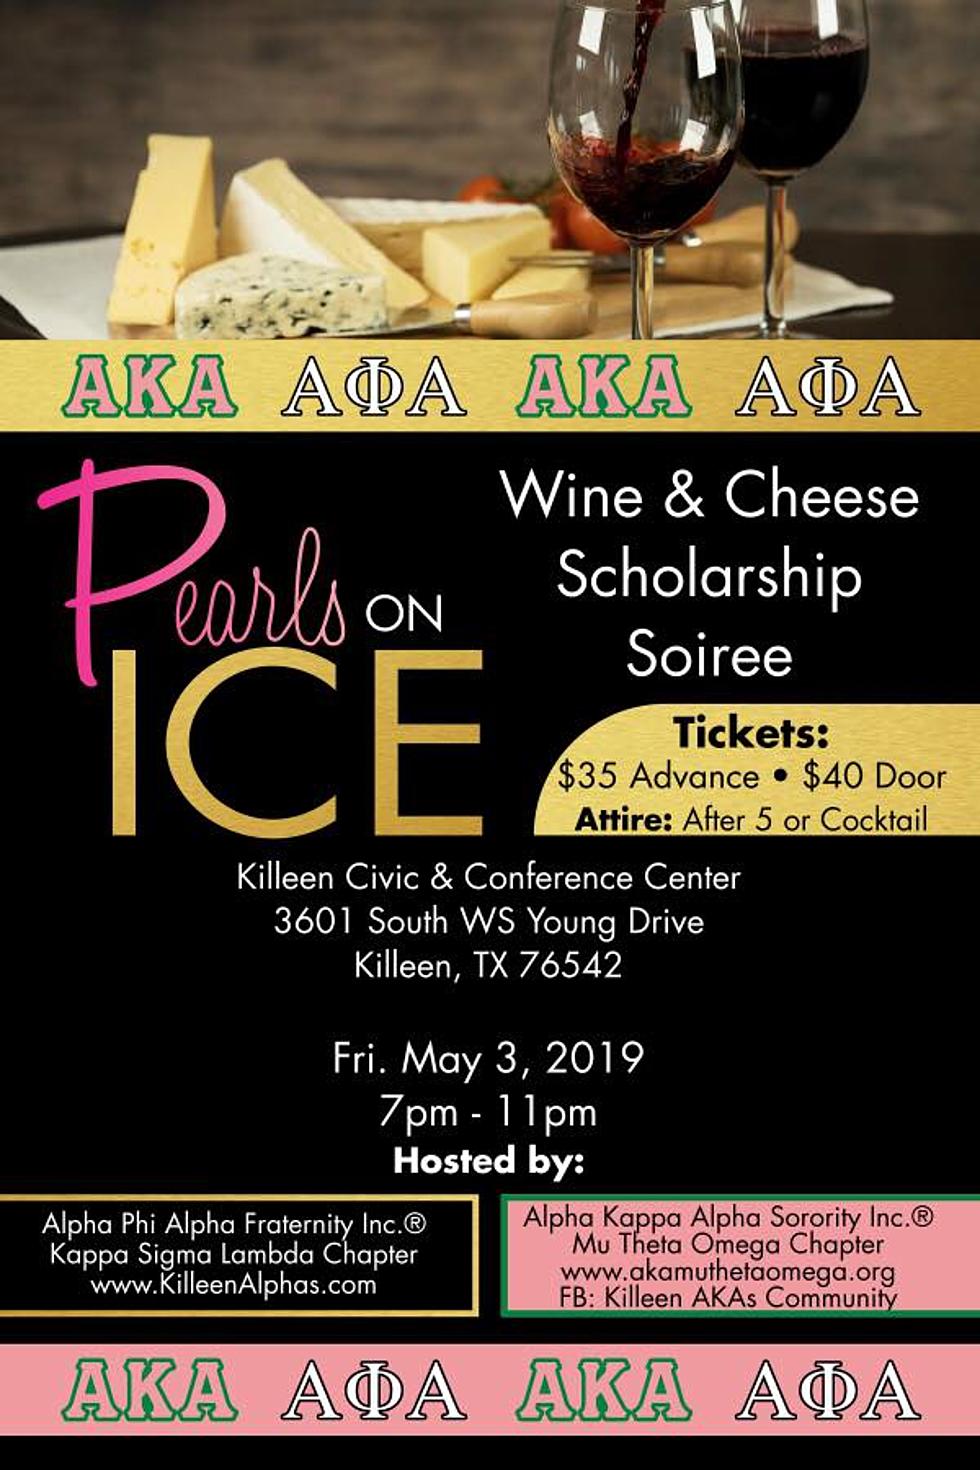 Pearls On Ice Wine and Cheese Scholarship Soiree